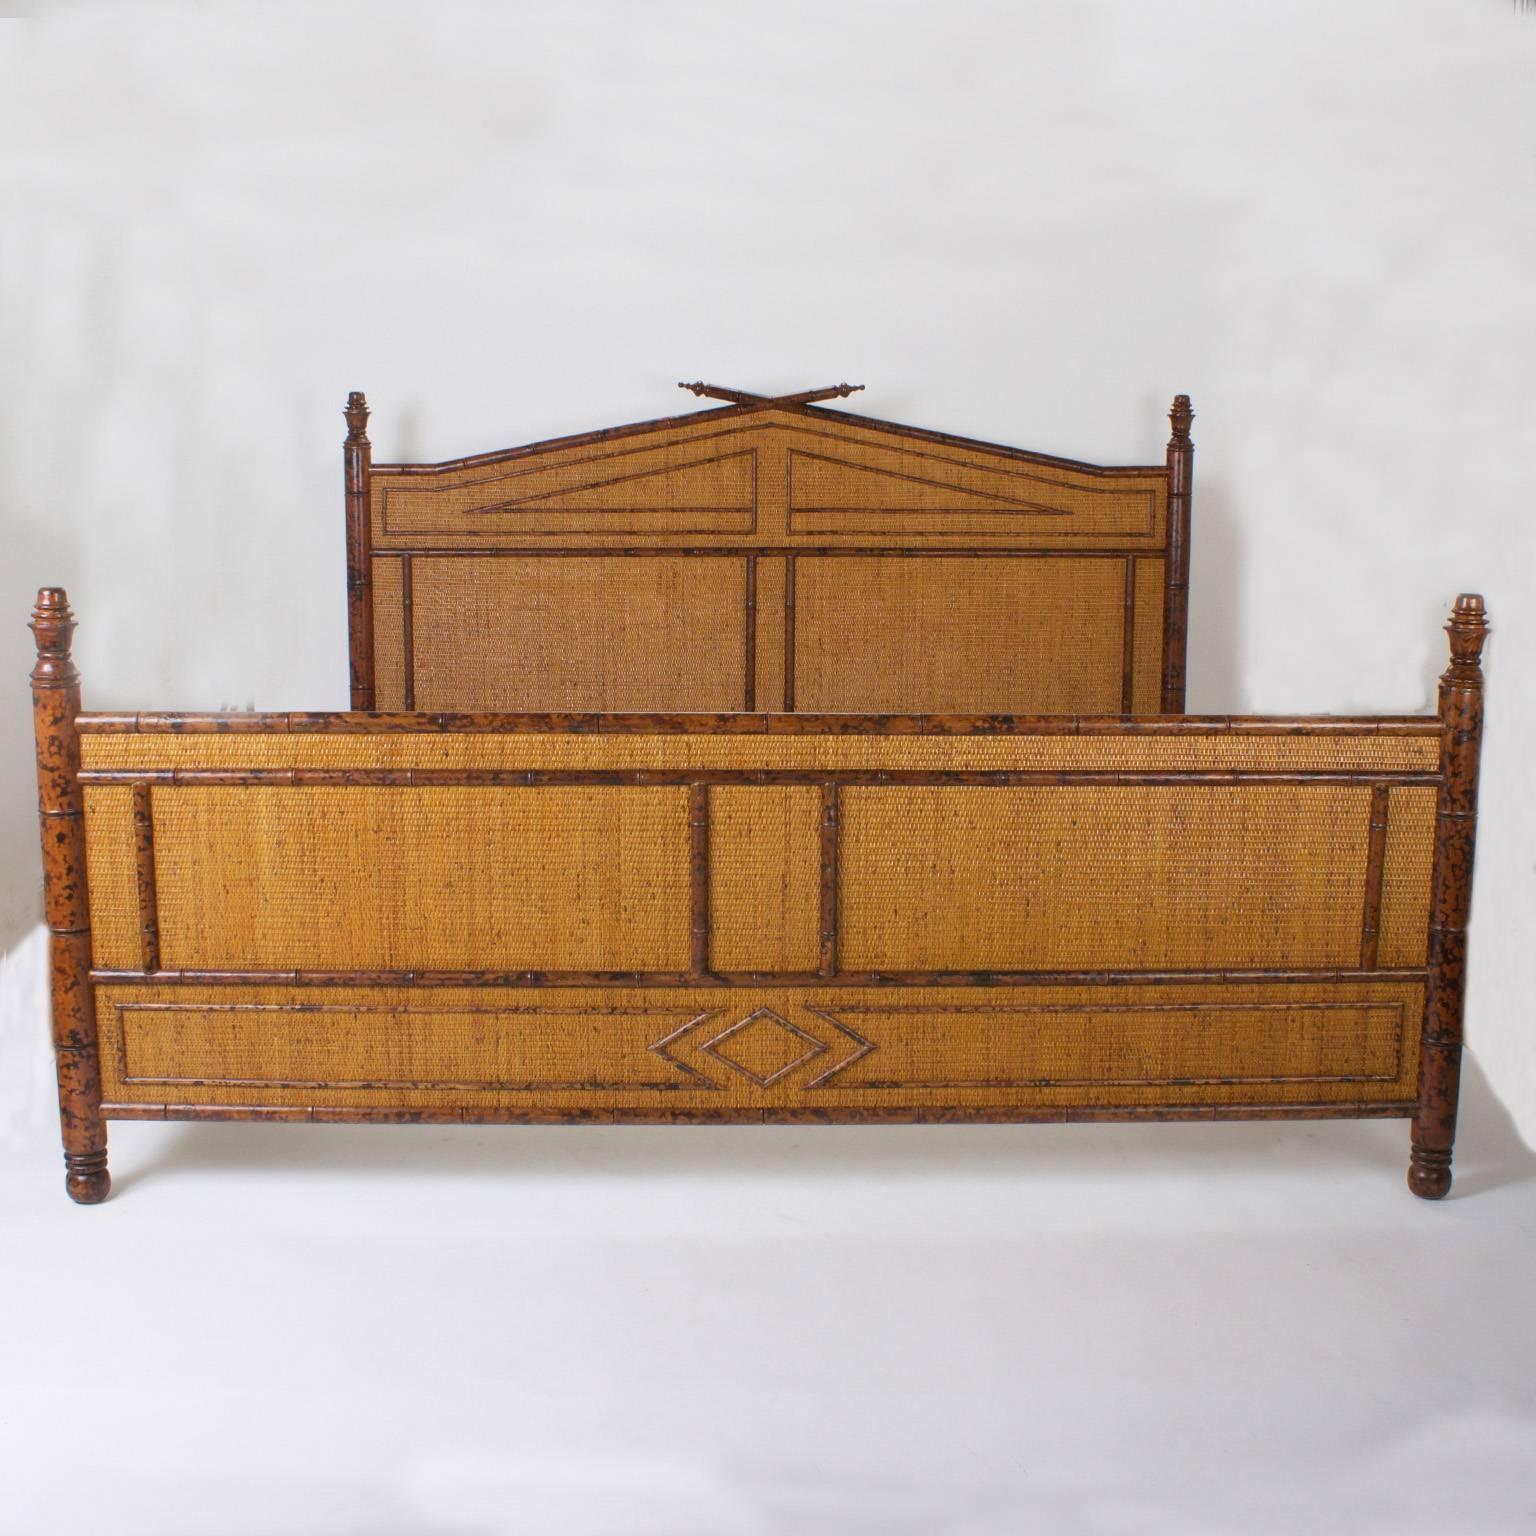 Mid-Century California or super king-size bed that includes headboard, footboard, and side rails. Featuring faux bamboo posts with turned finials and feet and geometric designs over grass cloth panels. This bed packs plenty of decorative punch with